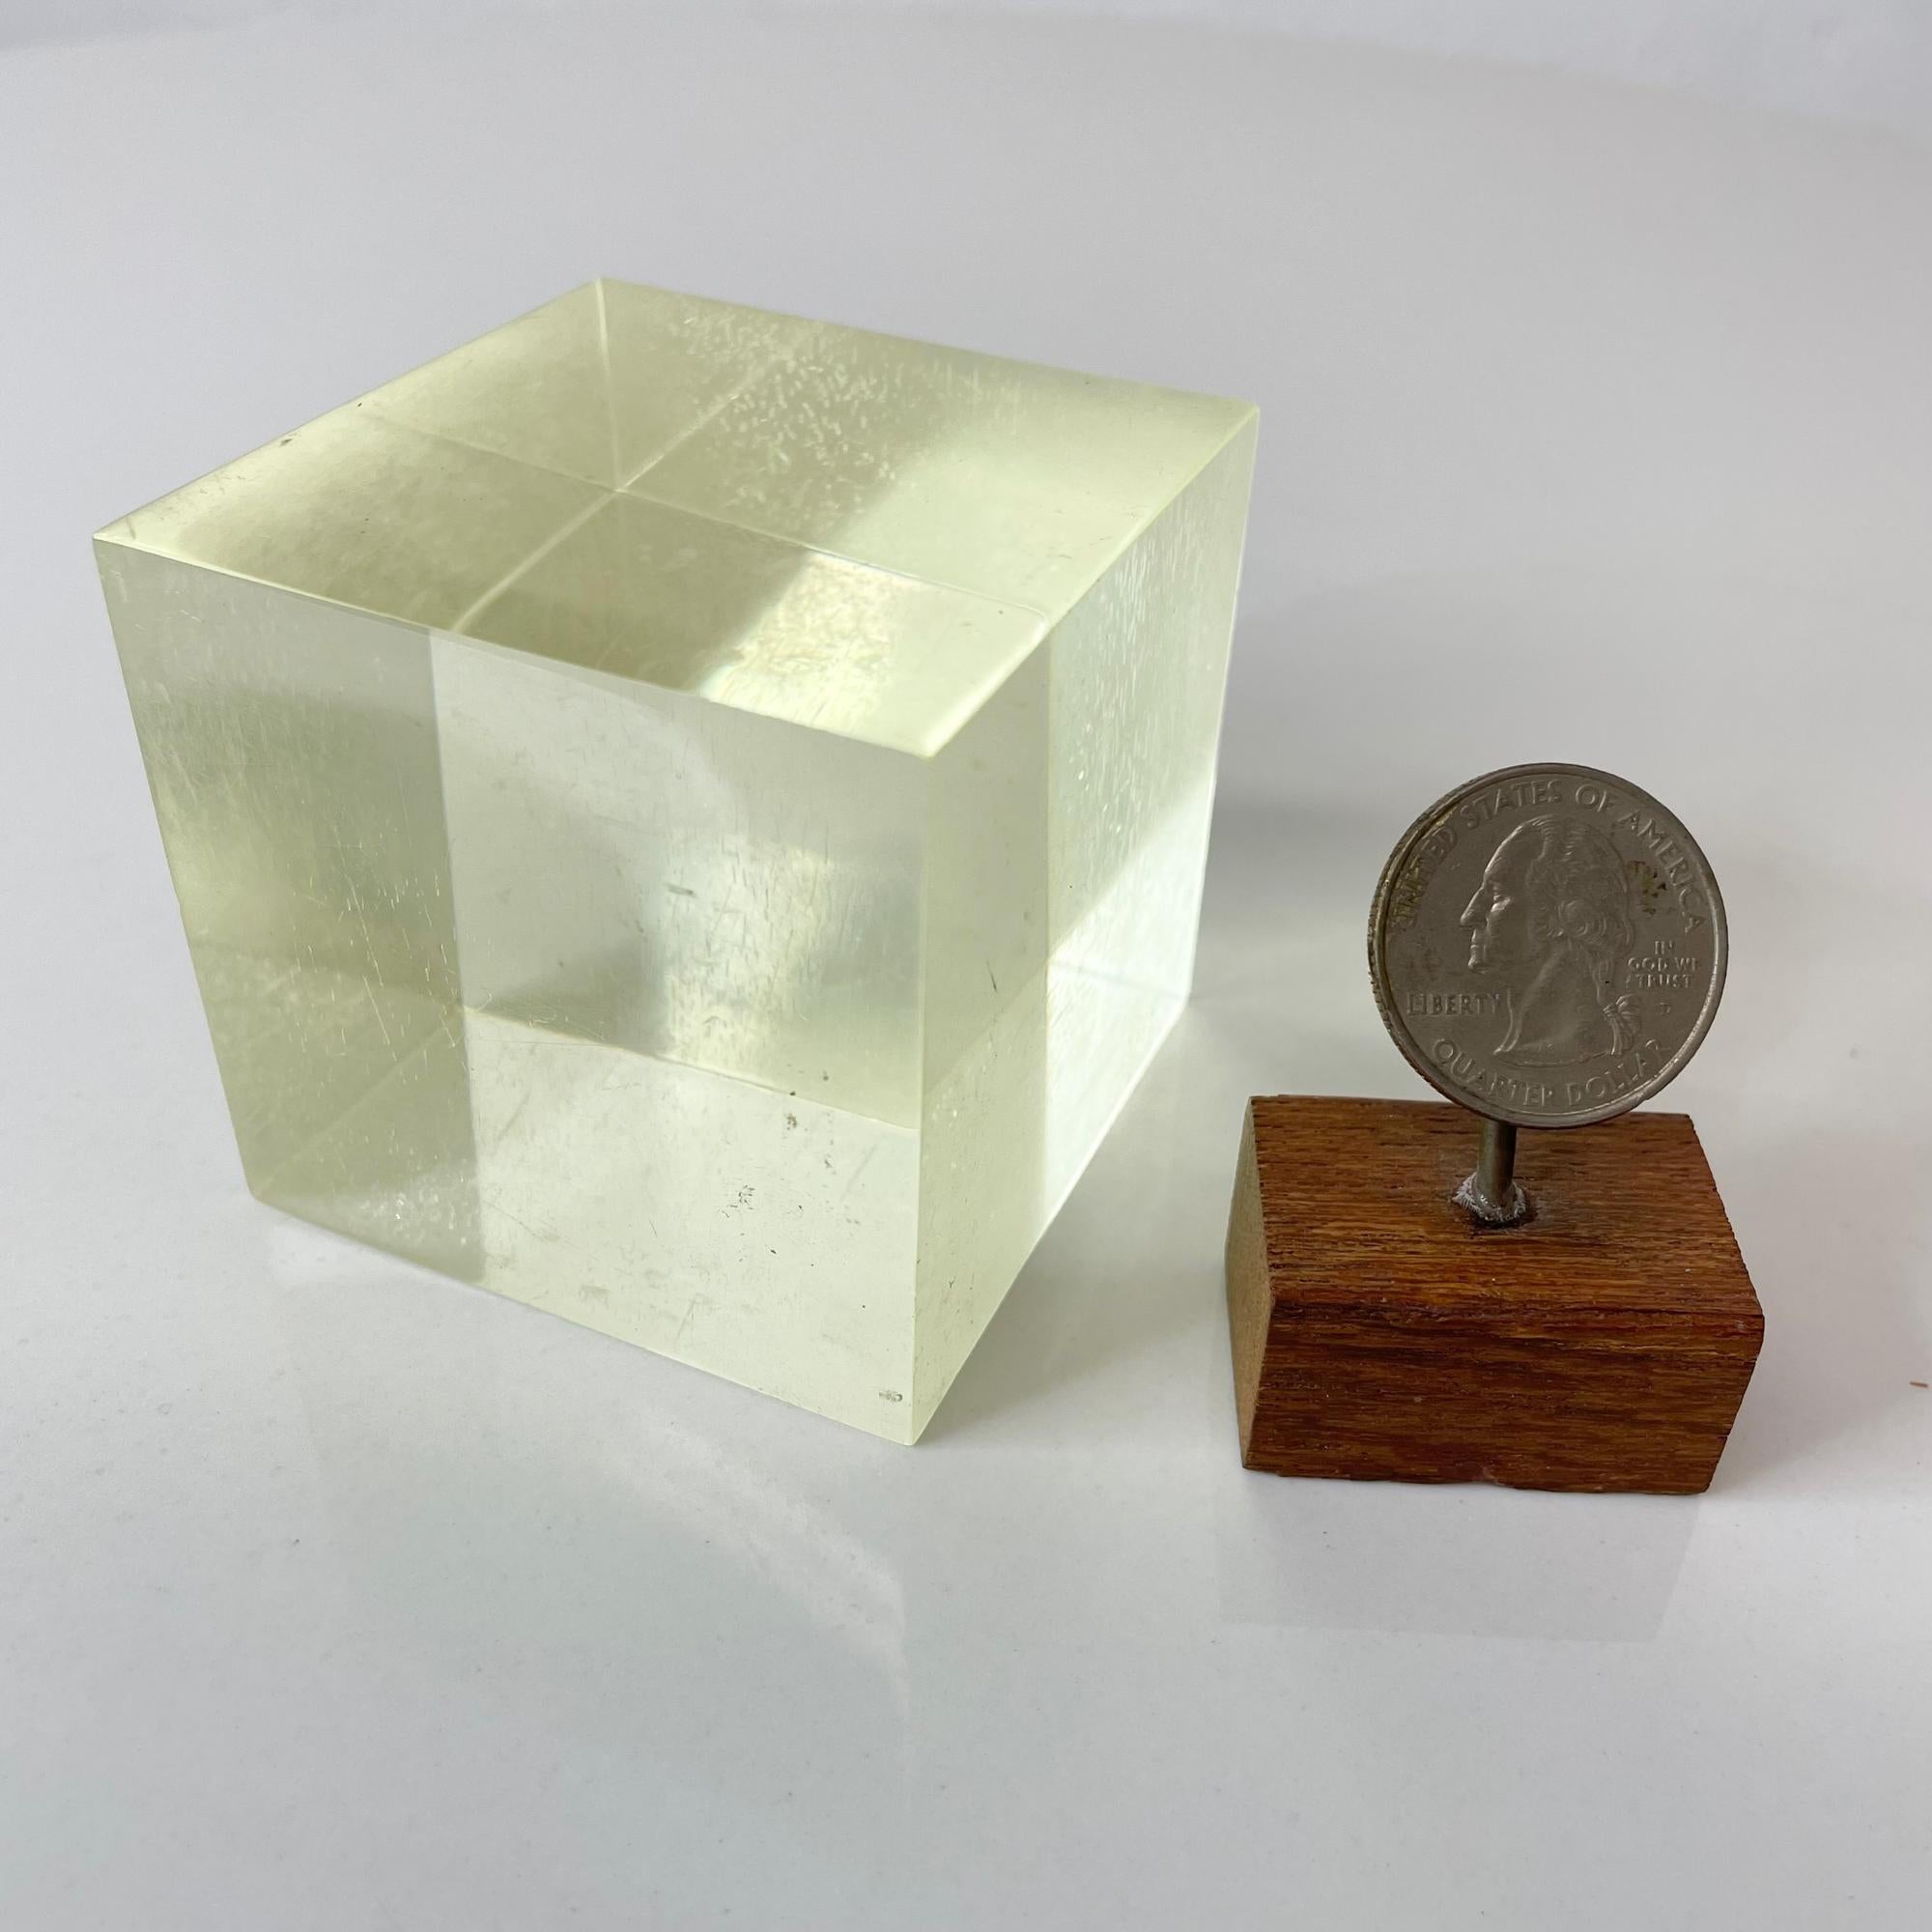 Late 20th Century Vintage Lucite Paperweight Geometric Cube 1970s Mod Desk Accessory